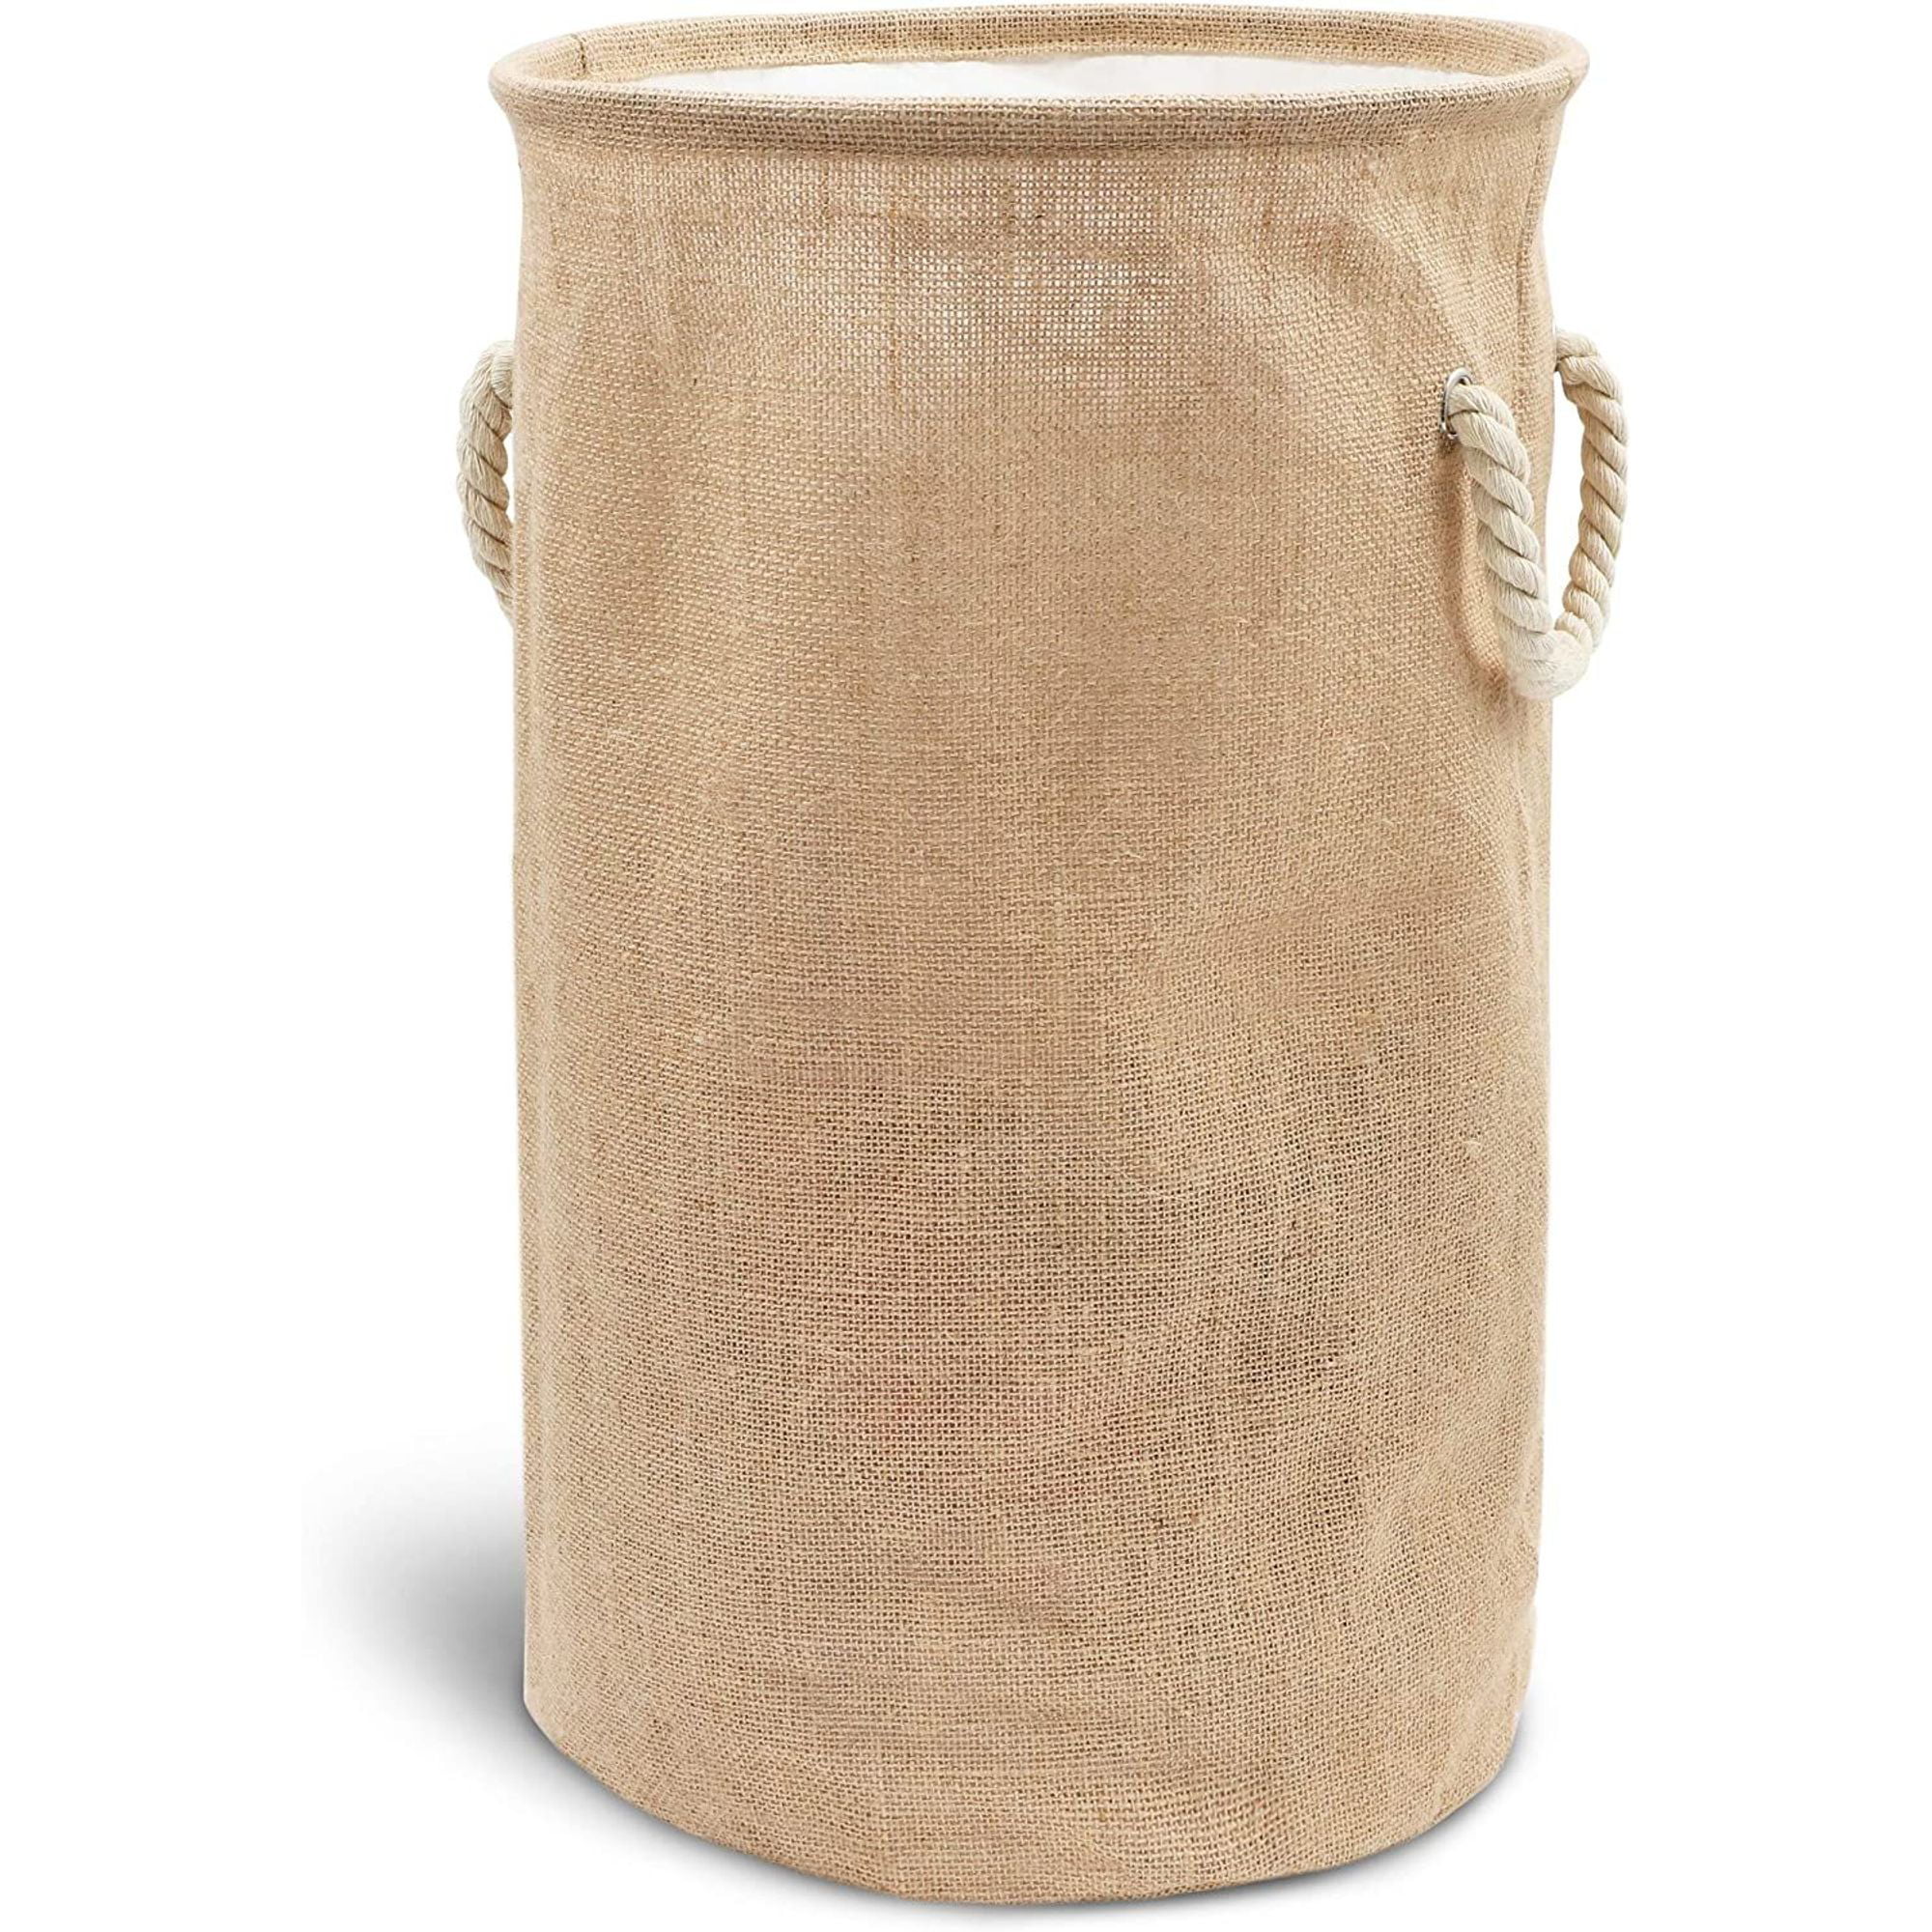 Tall Bamboo Wicker Weave Laundry Hamper W Steel Frame & Cloth-Lined 